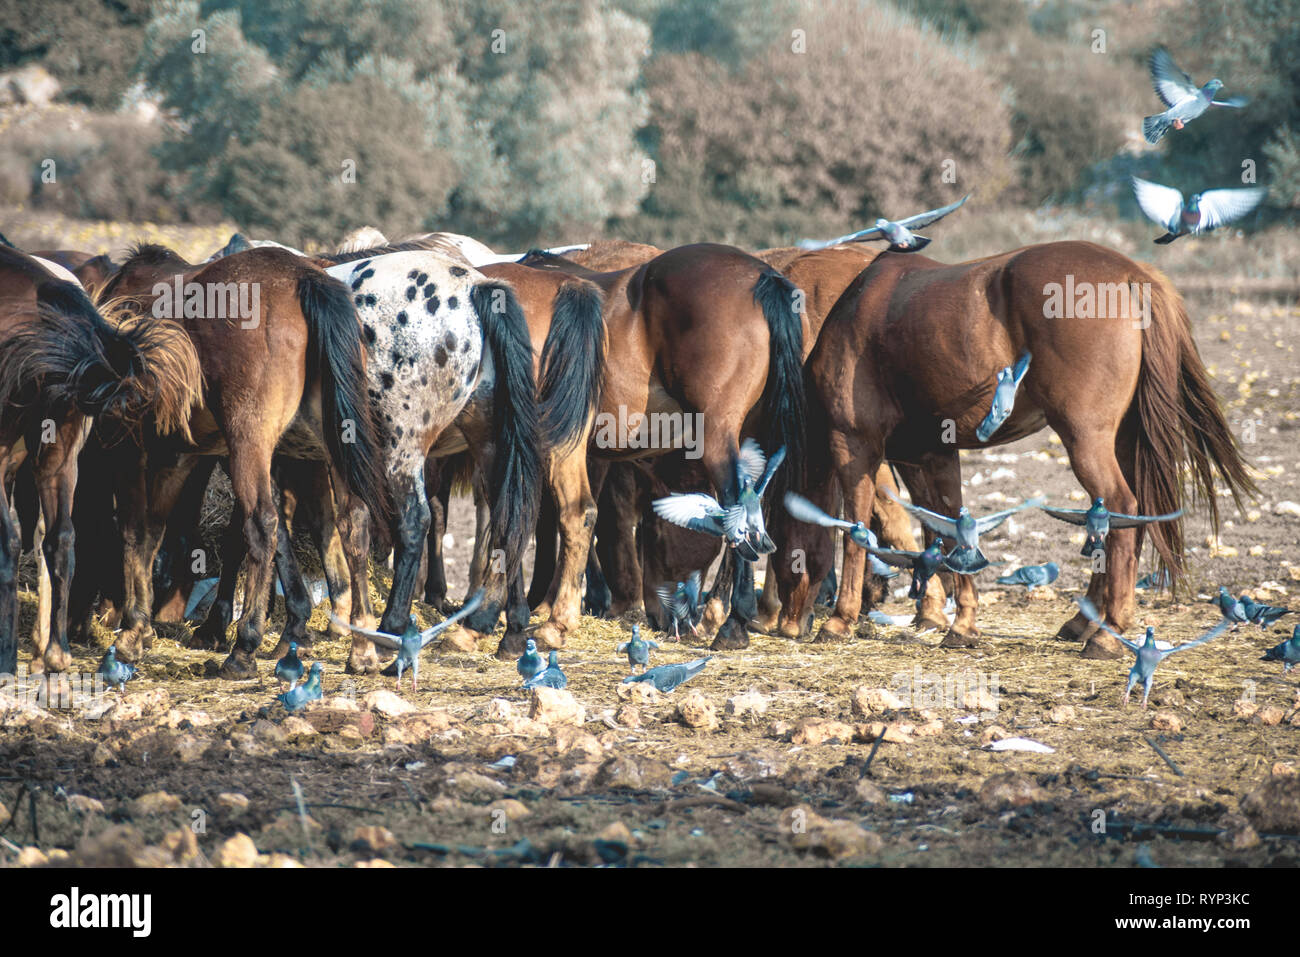 wild horses from behind  in a field with flying pigeons Stock Photo